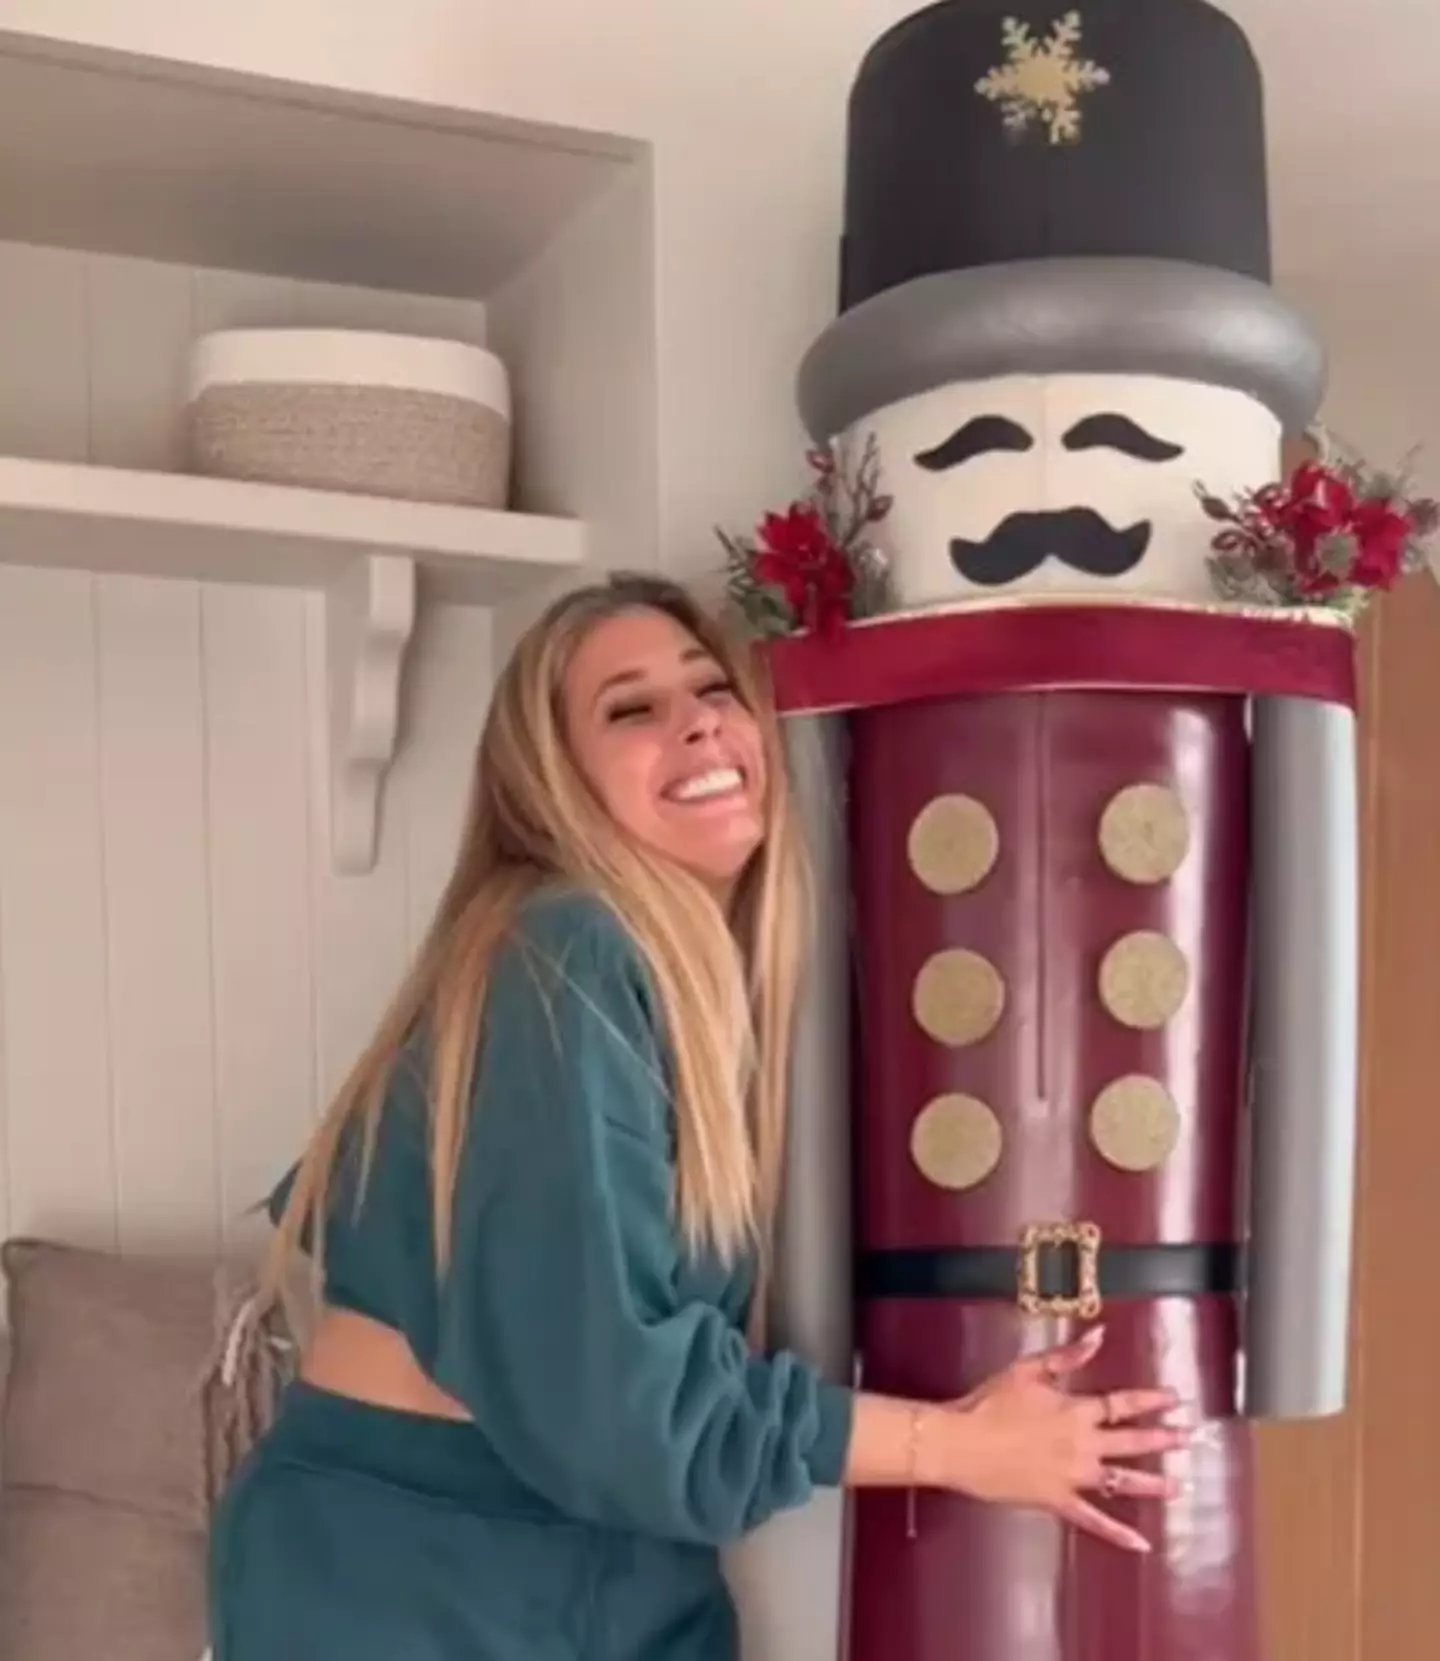 Stacey Solomon went big when it came to Christmas decorations.